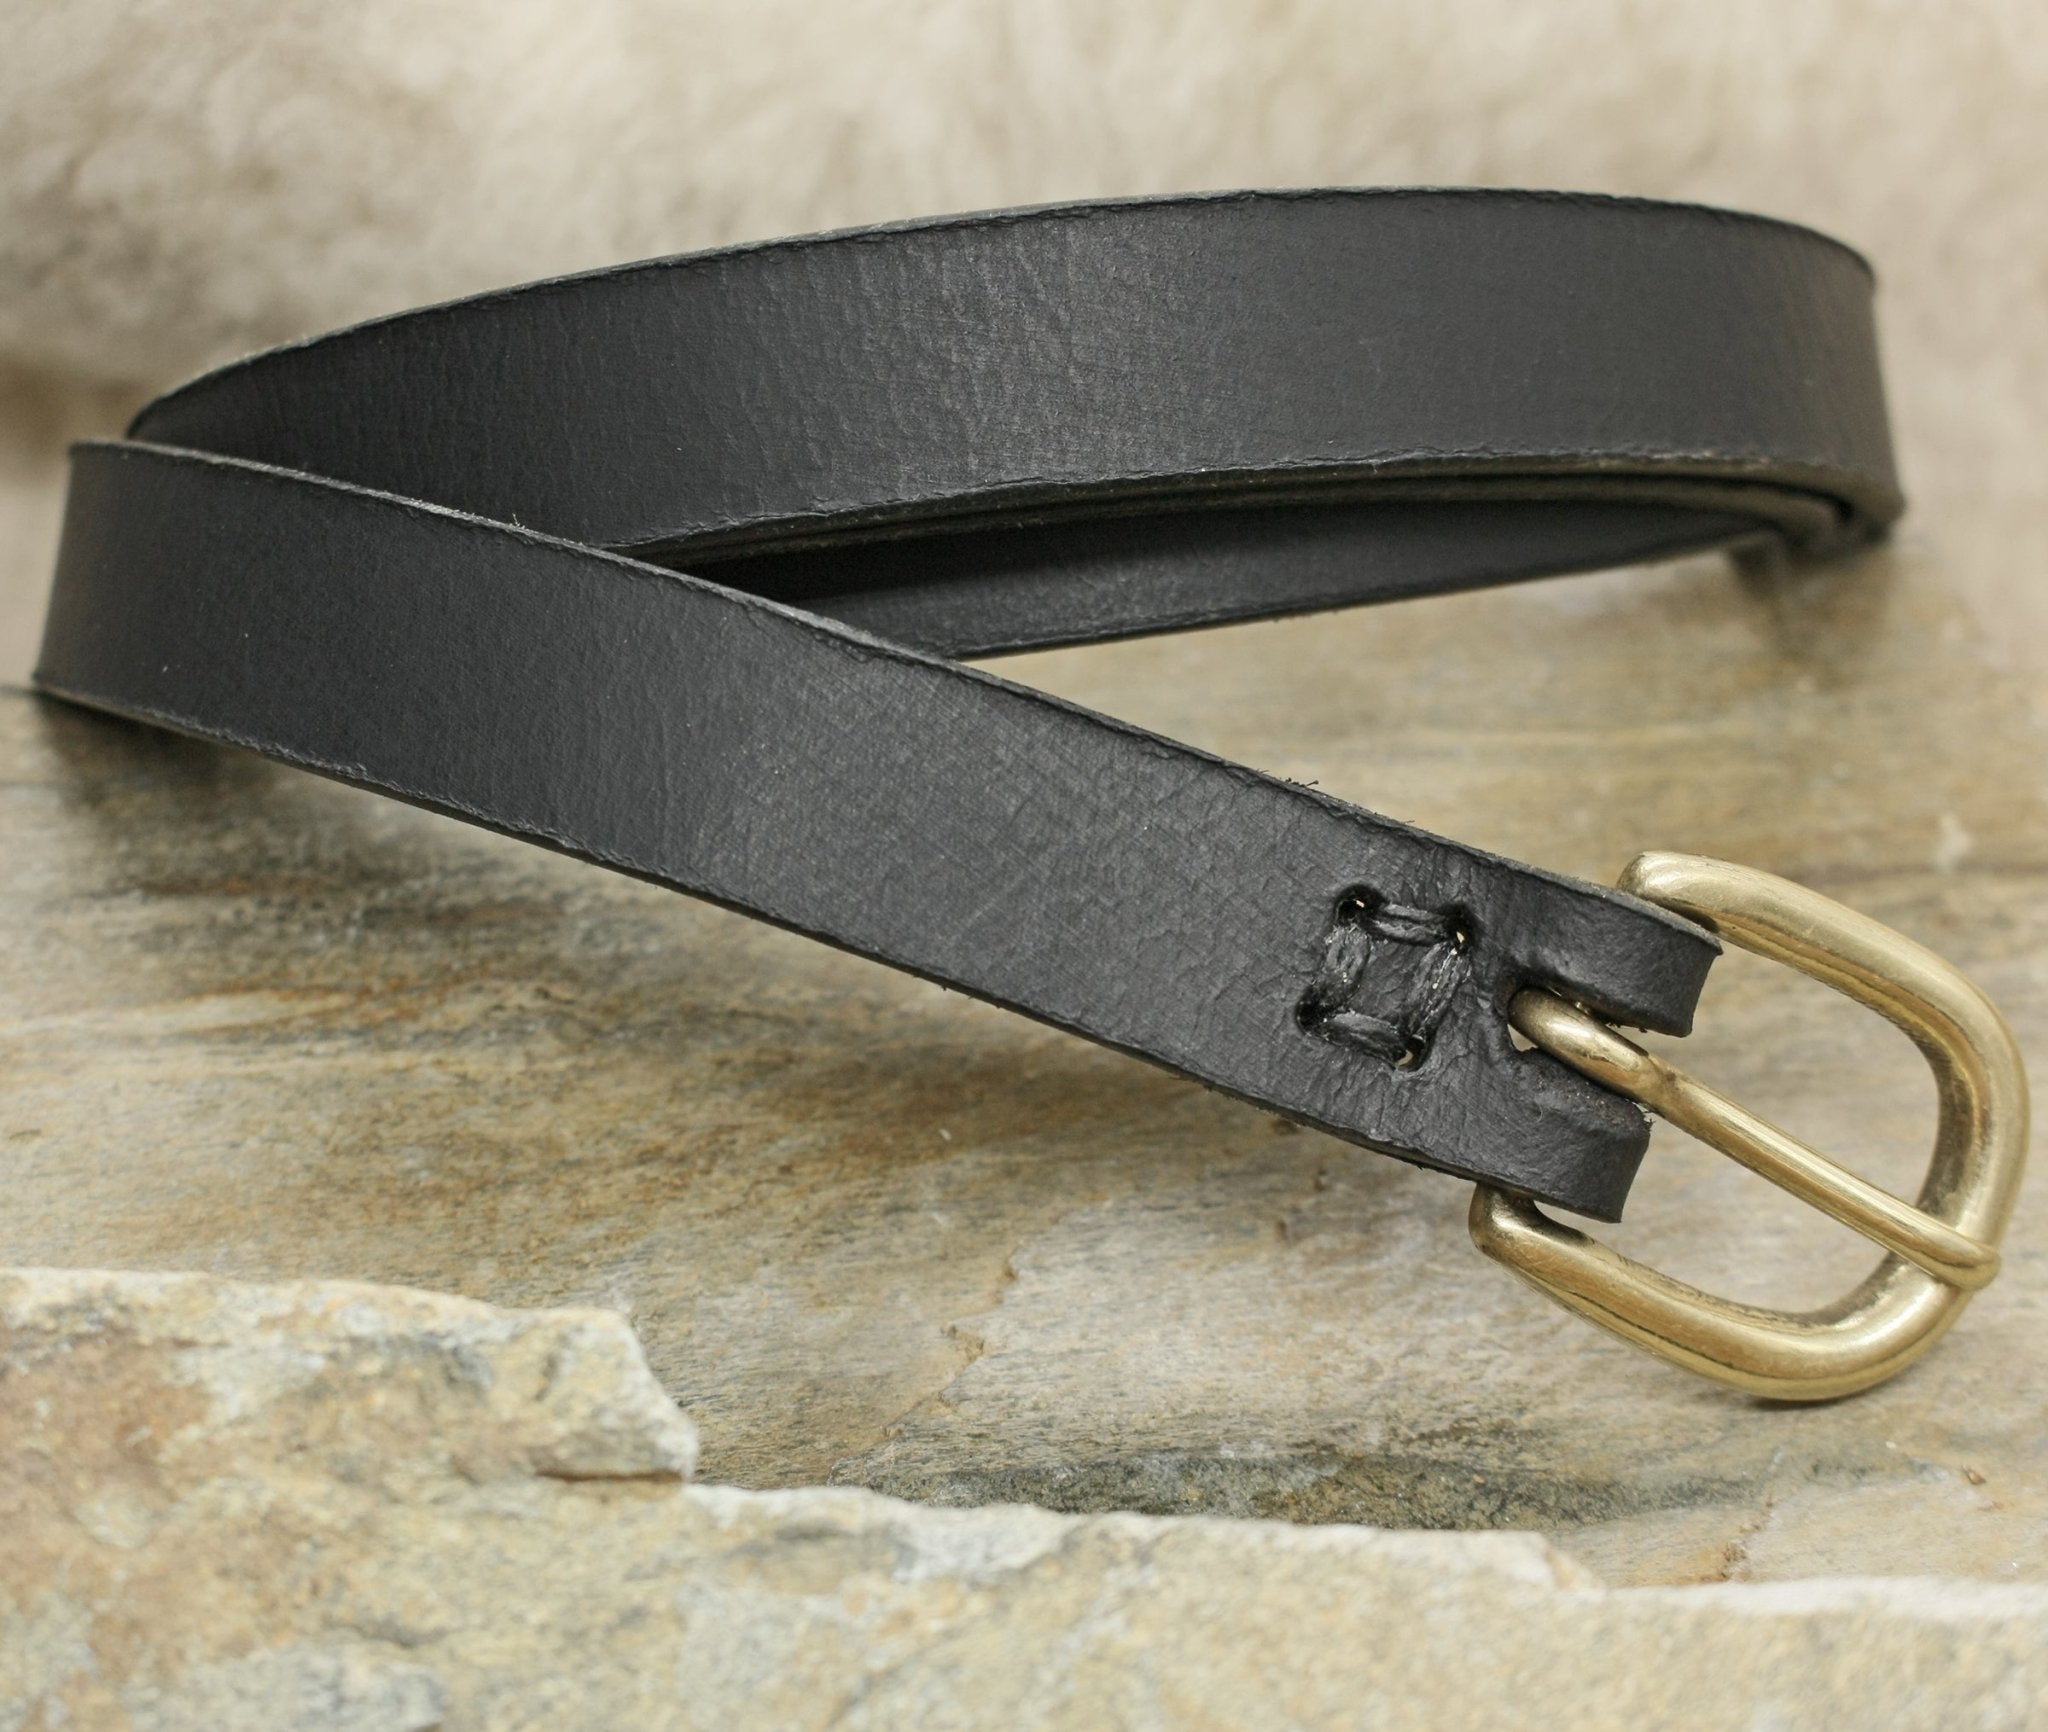 Babaton Park Leather Belt in Black/Gold size 2XS